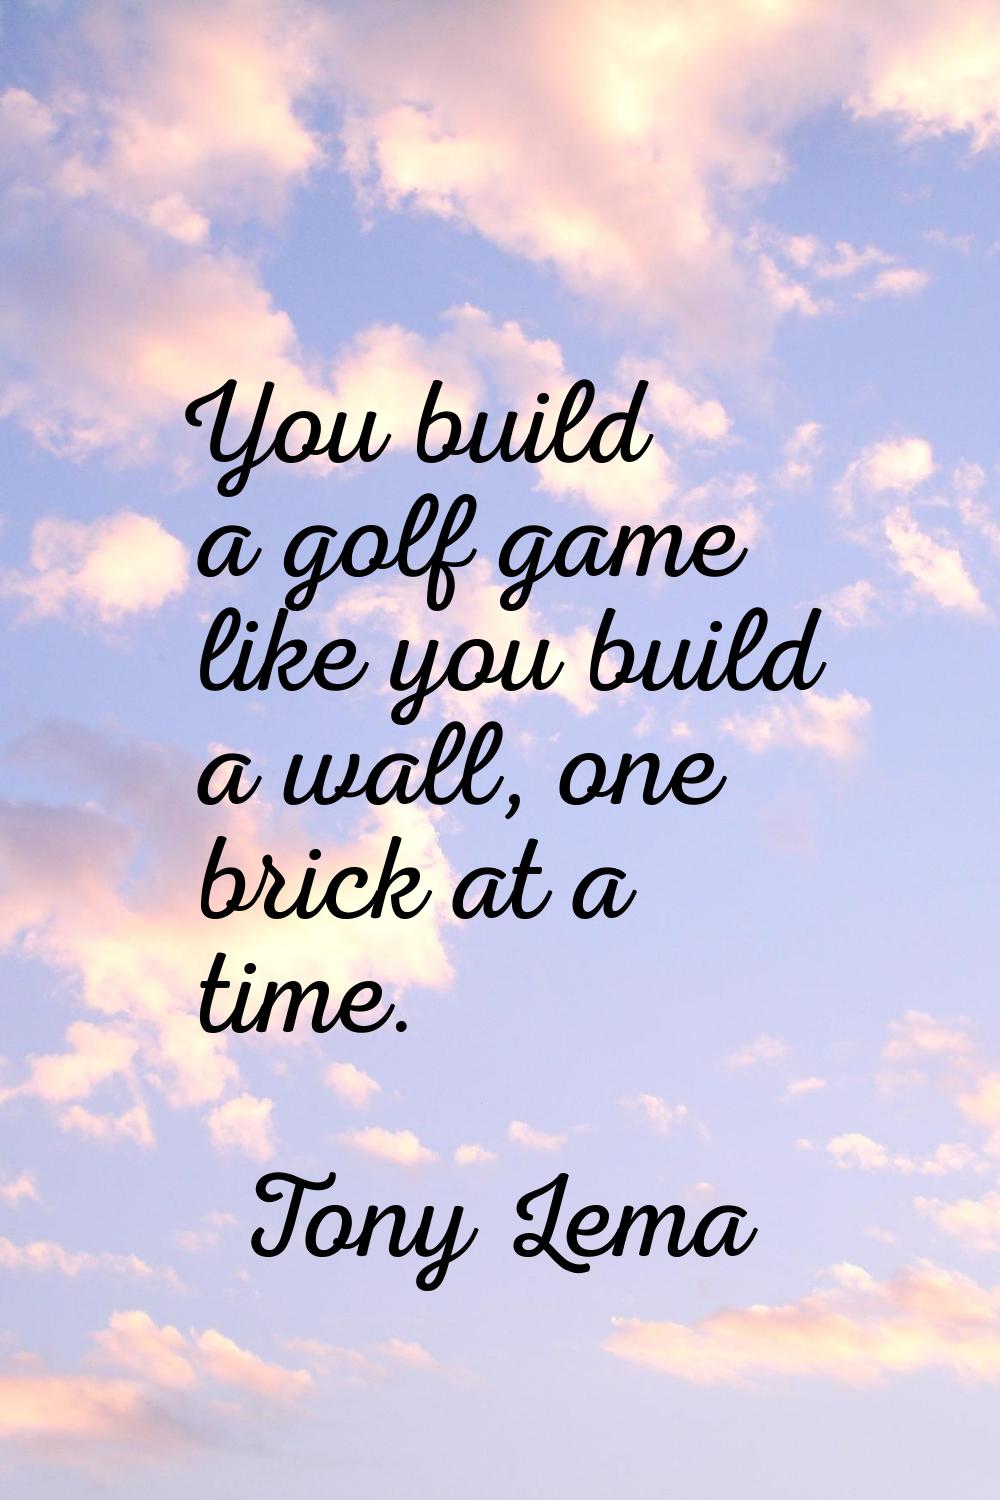 You build a golf game like you build a wall, one brick at a time.